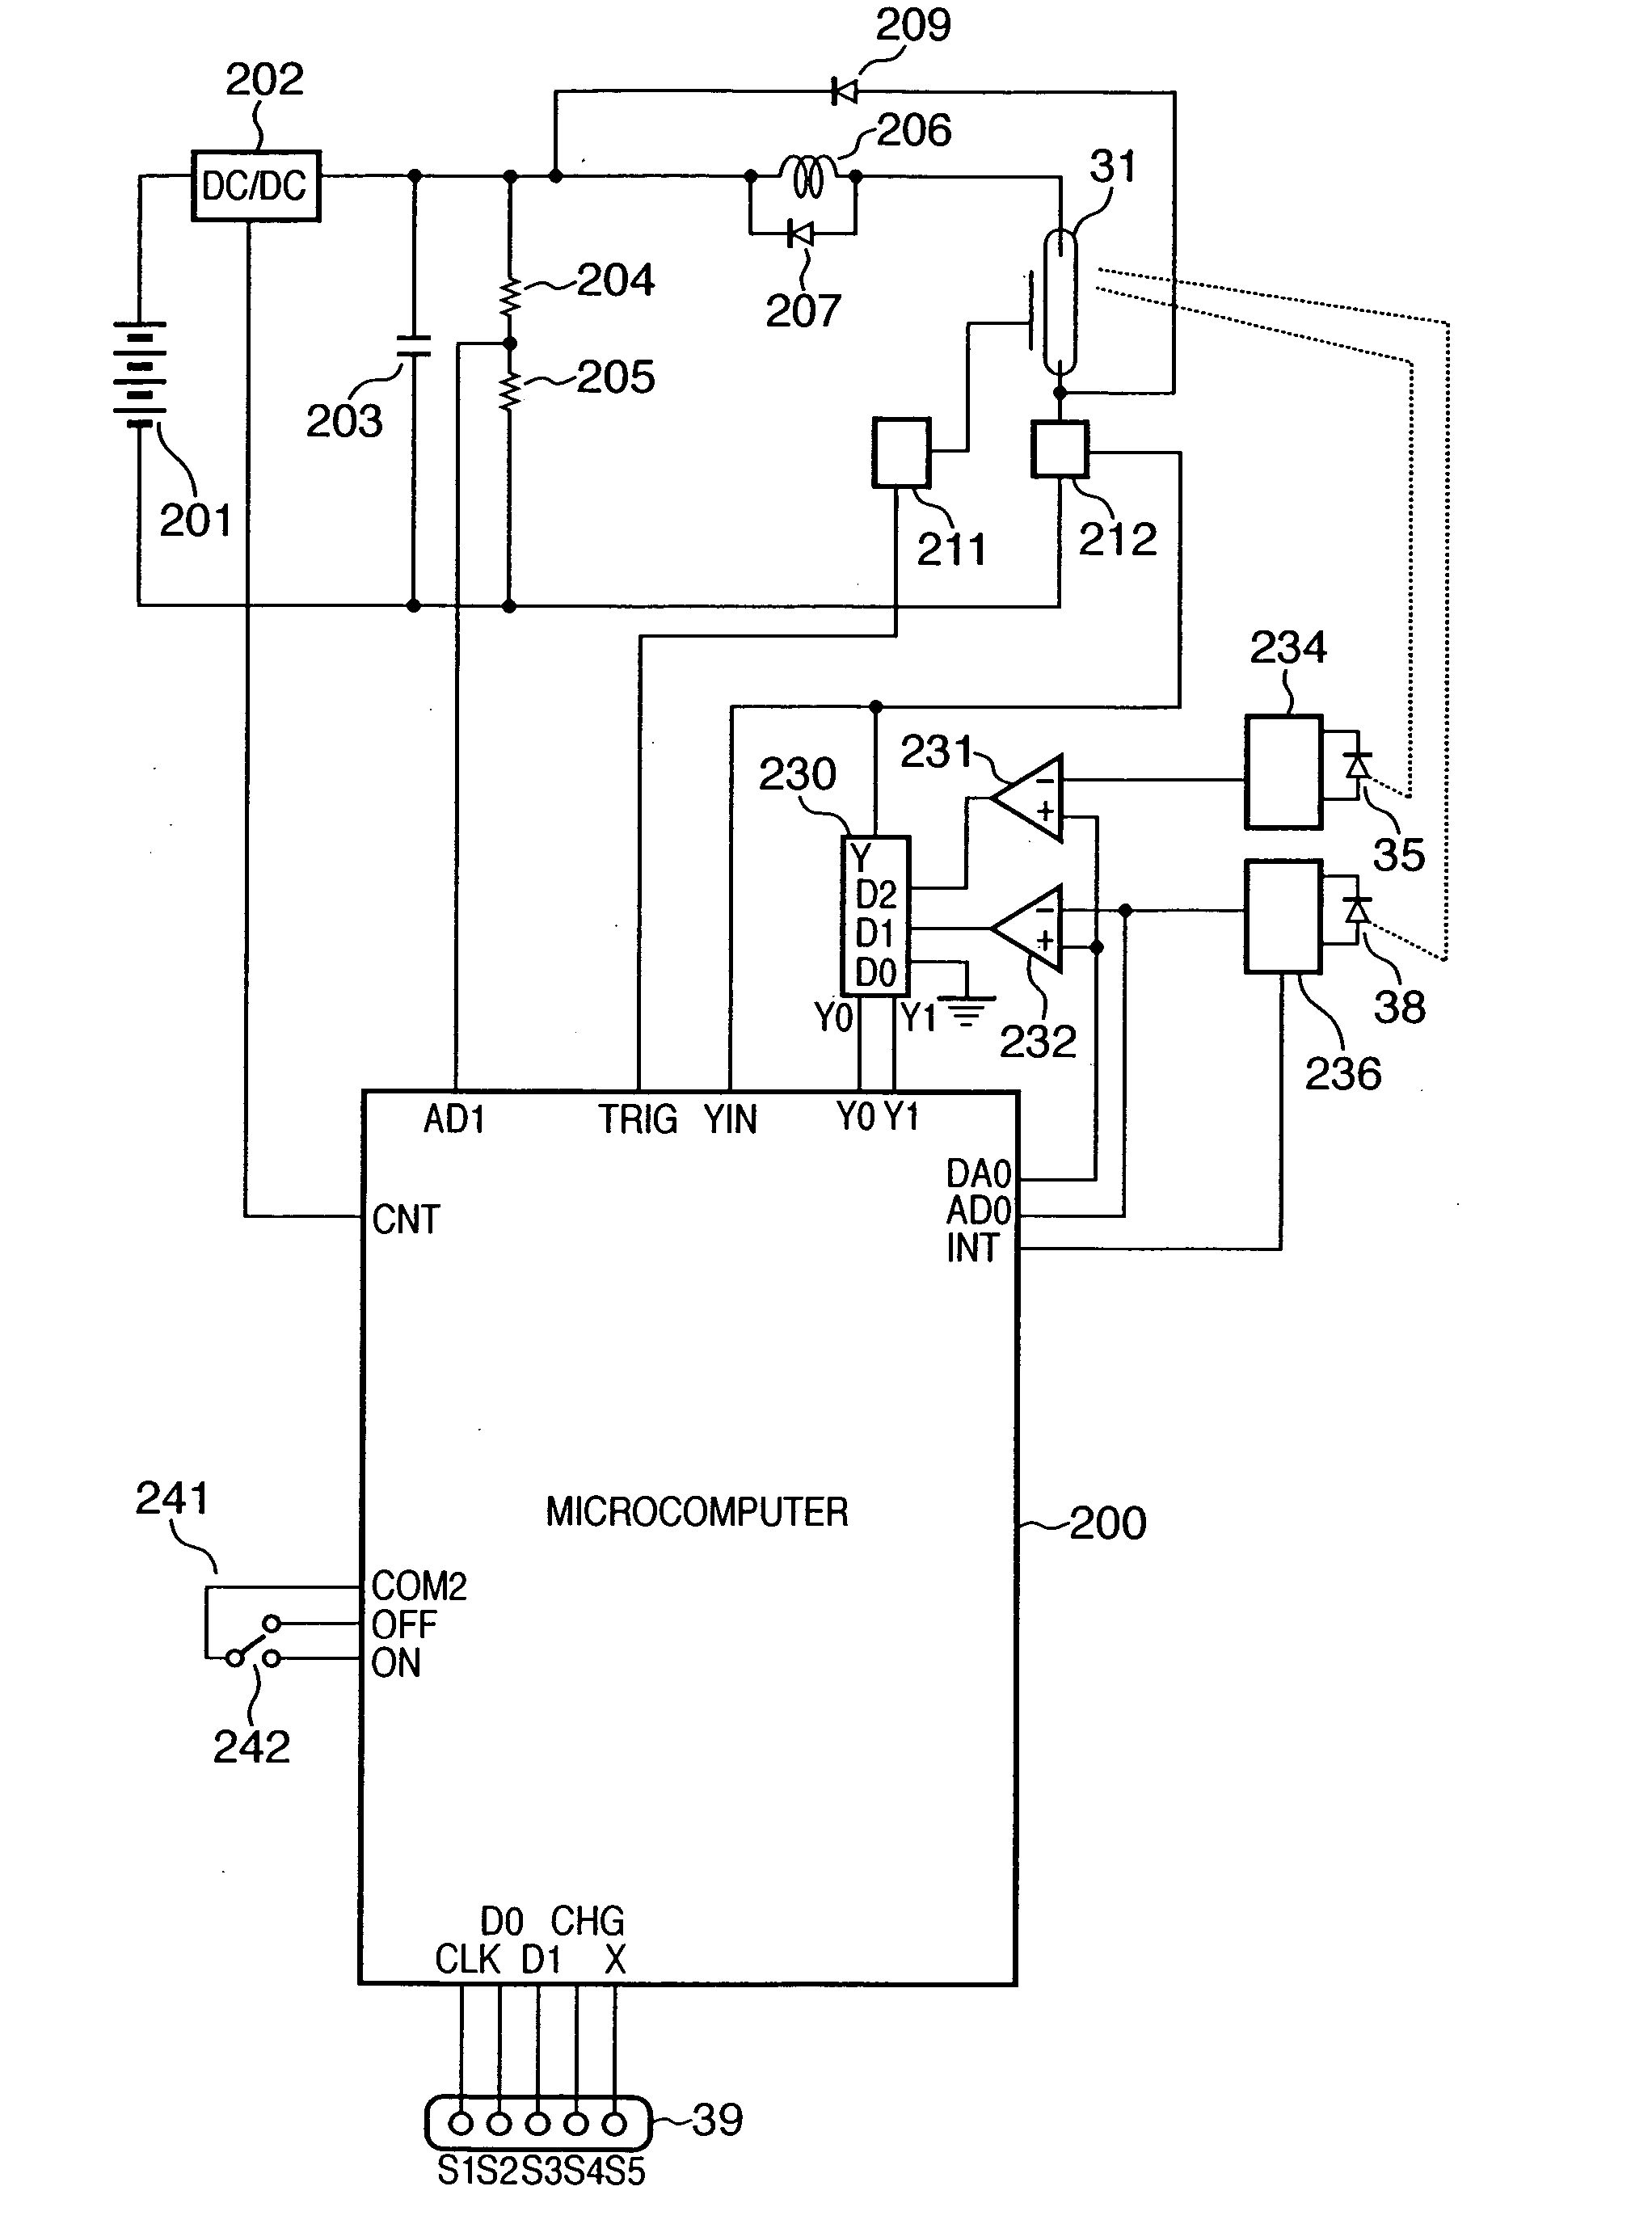 Image sensing device and control method thereof